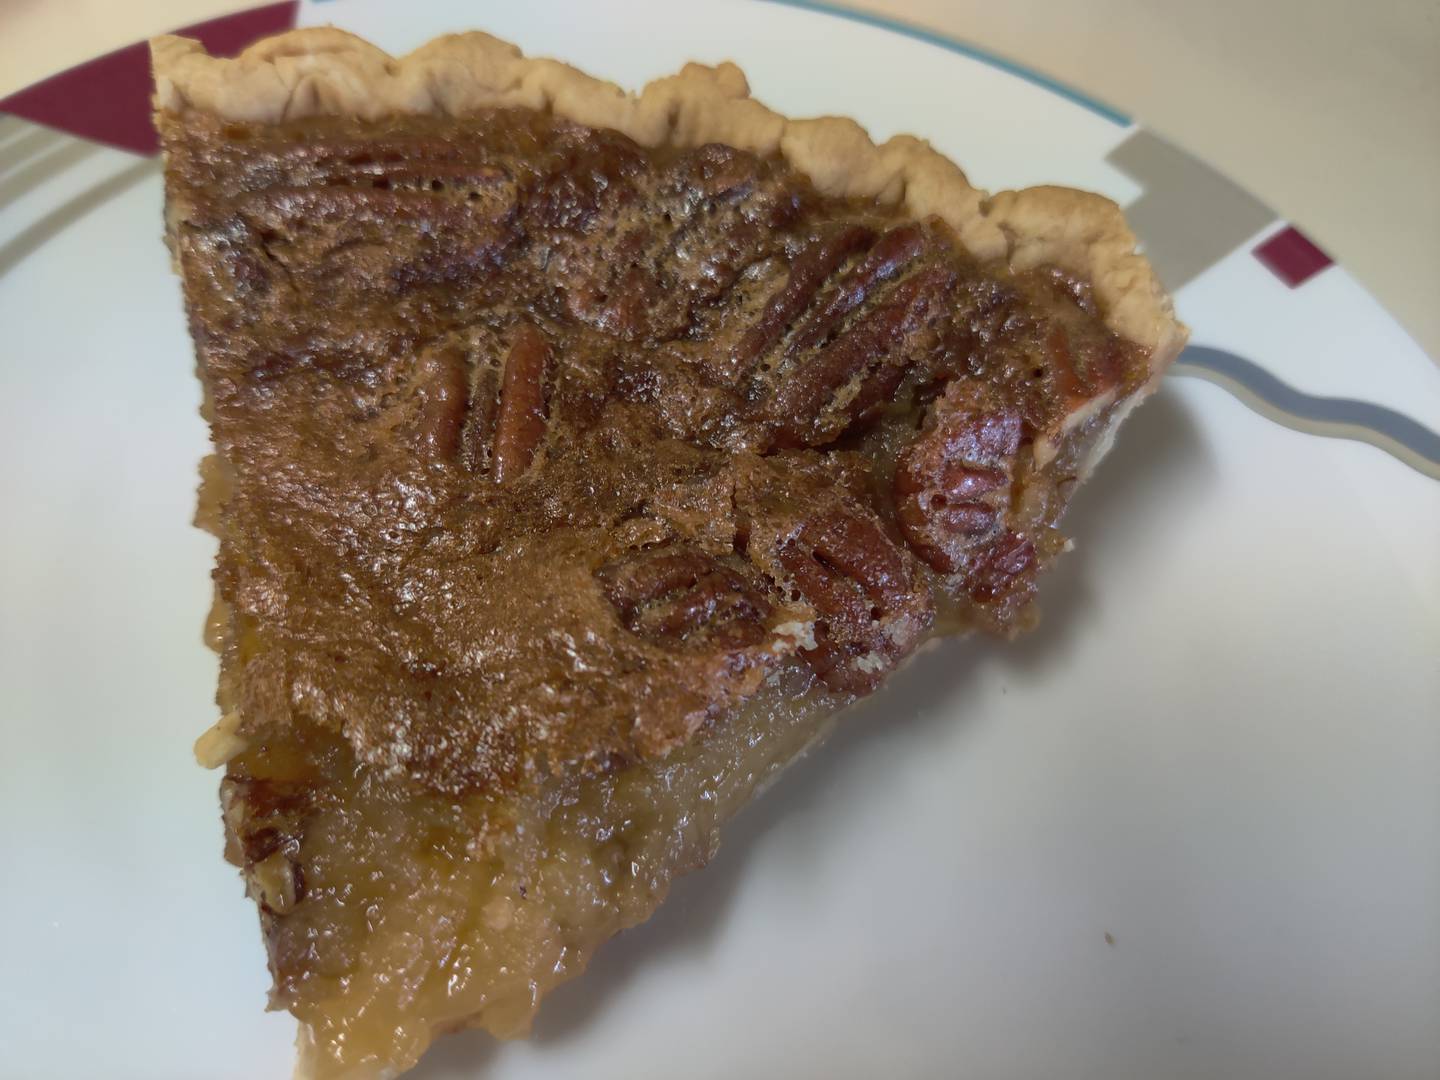 A slice of pecan pie to-go from The Atrium Café in downtown Geneva.